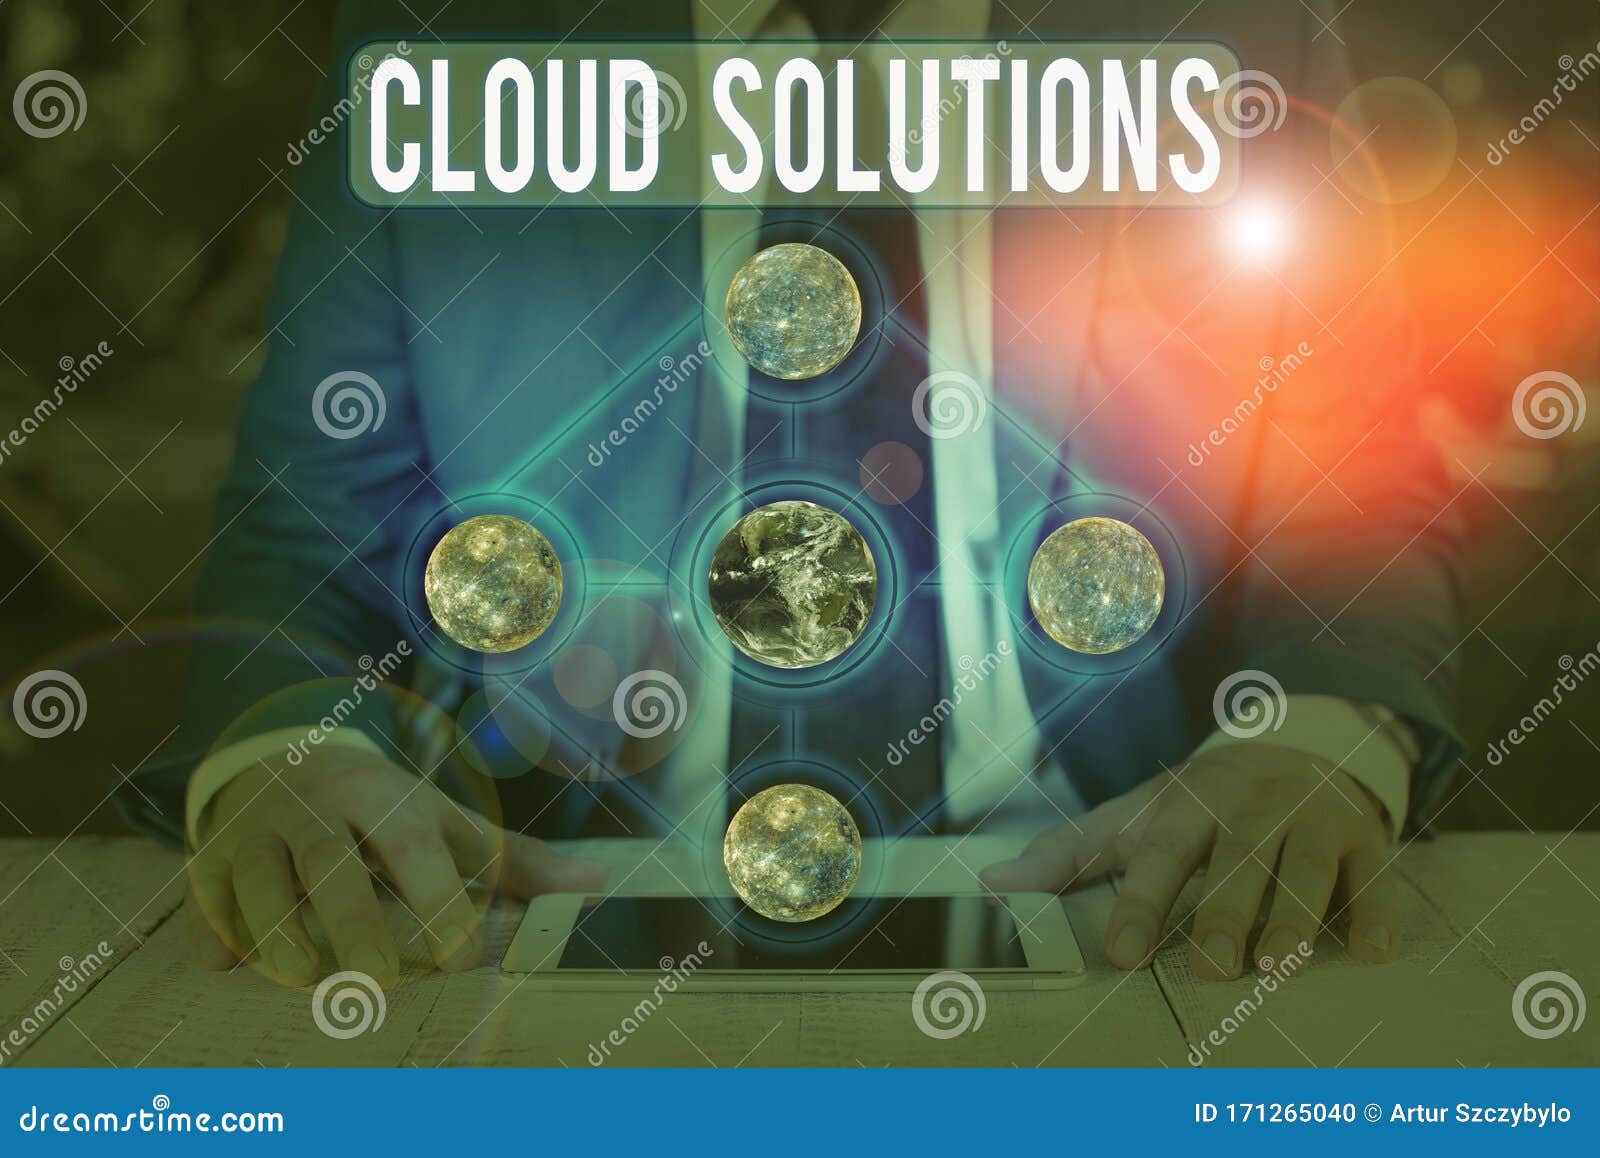 word writing text cloud solutions. business concept for ondemand services or resources accessed via the internet s of this